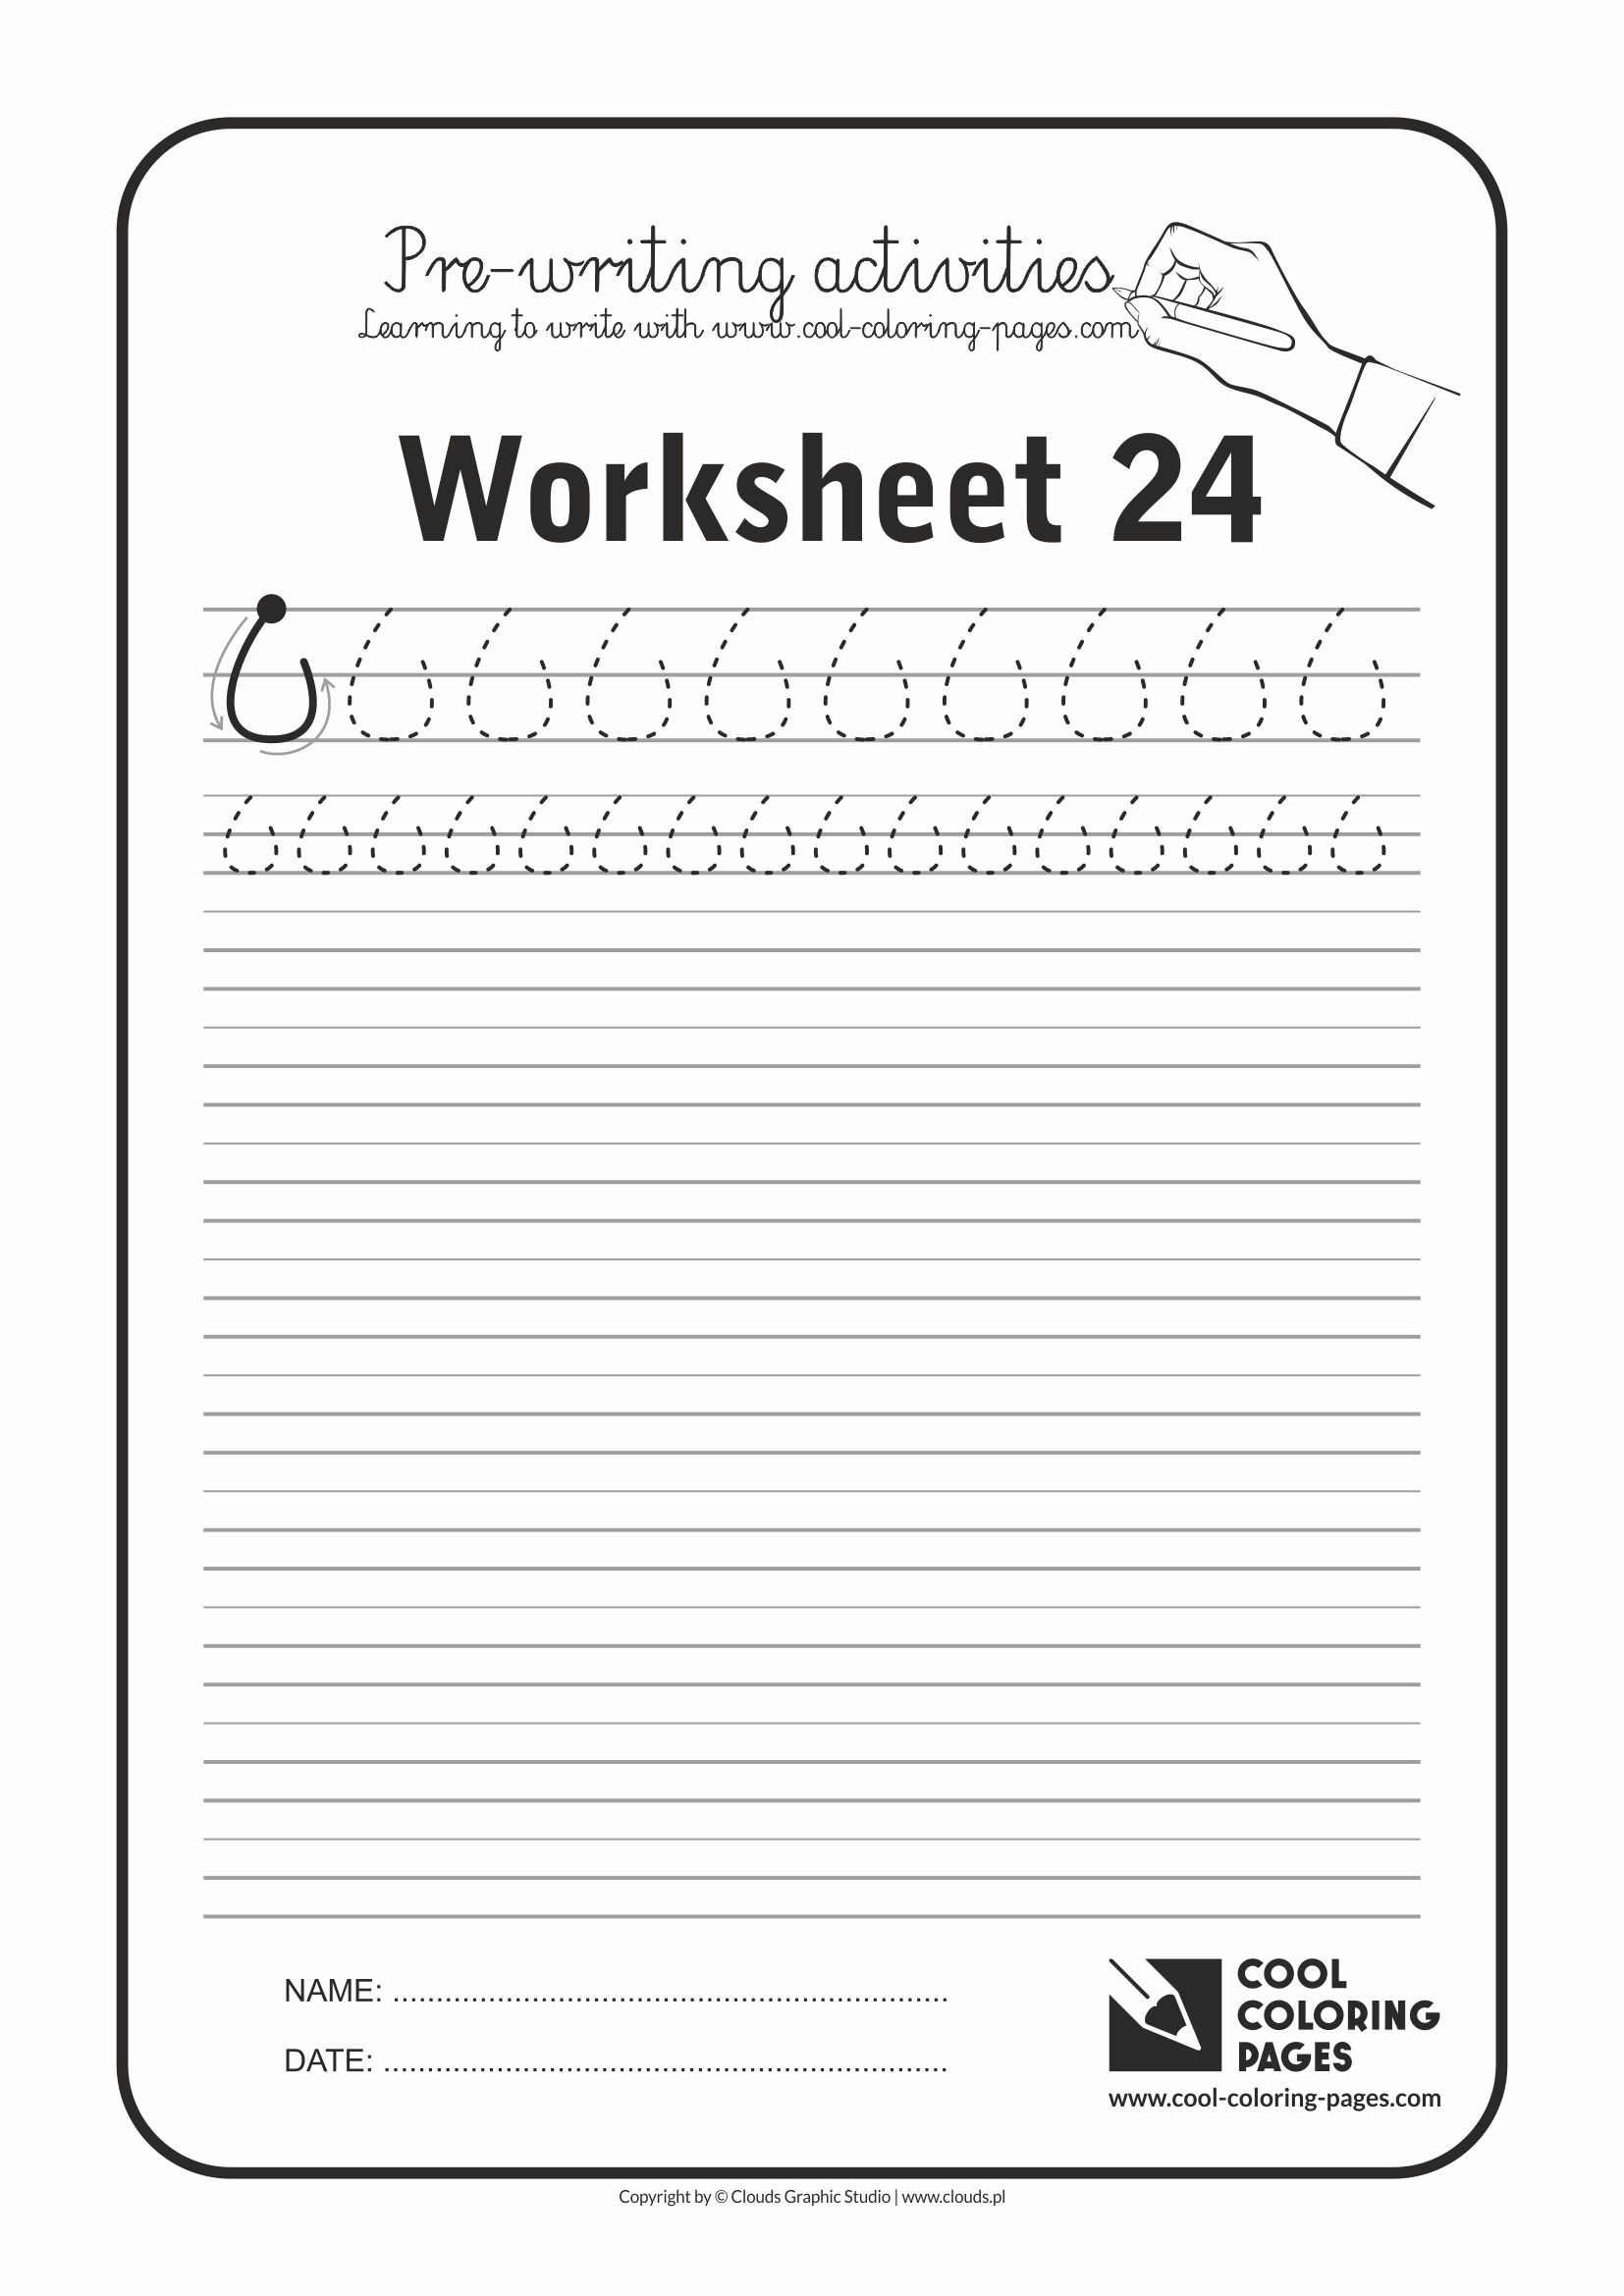 Cool Coloring Pages / Pre-writing activities / Worksheet no.24